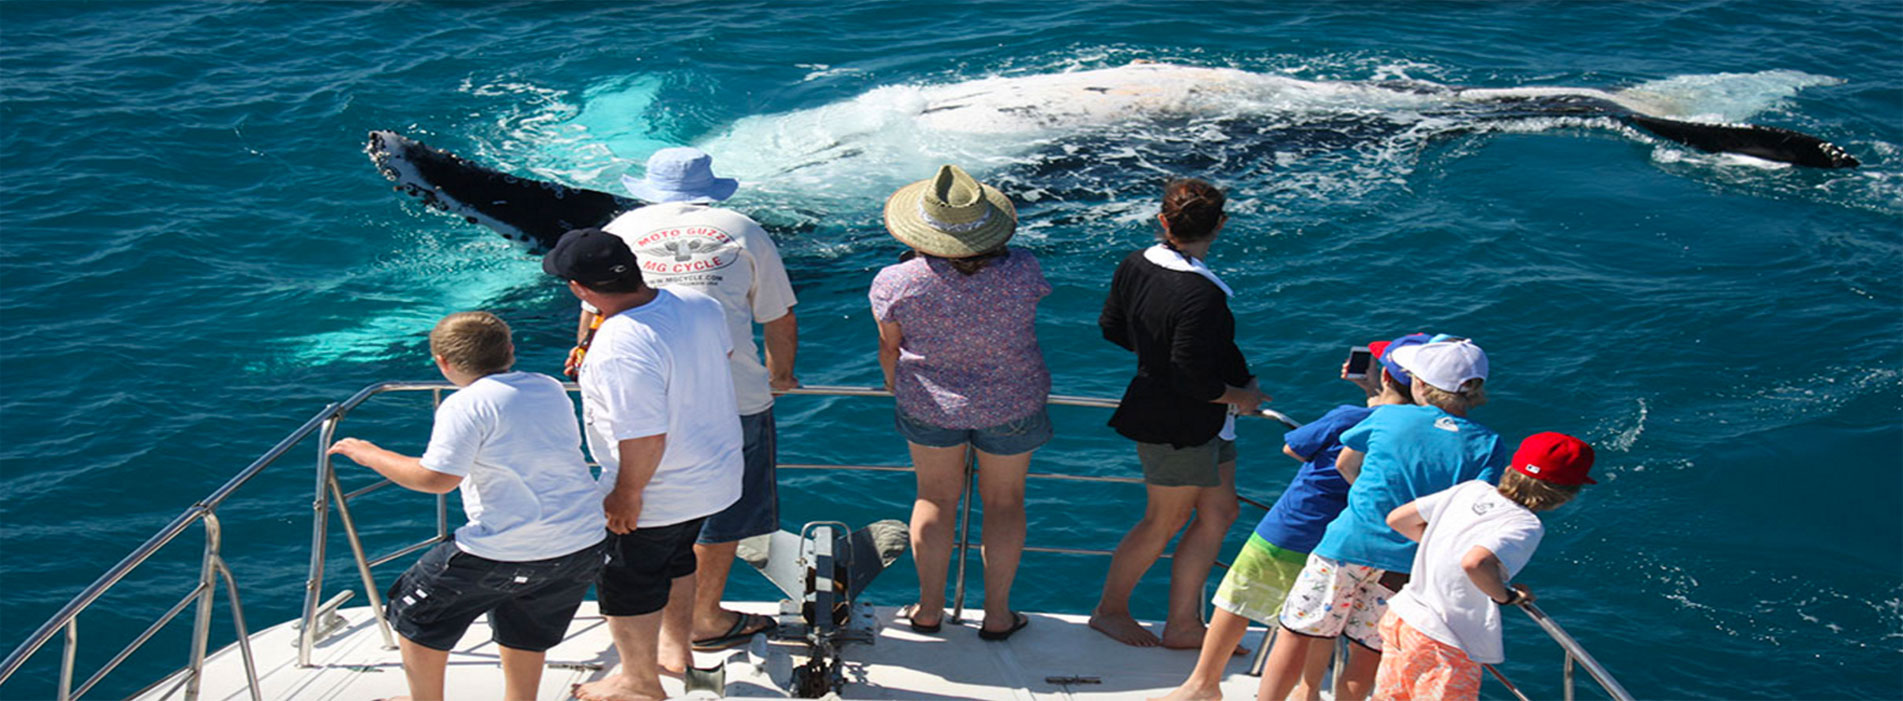 WHALE WATCHING BOAT TOURS passengers West Australia